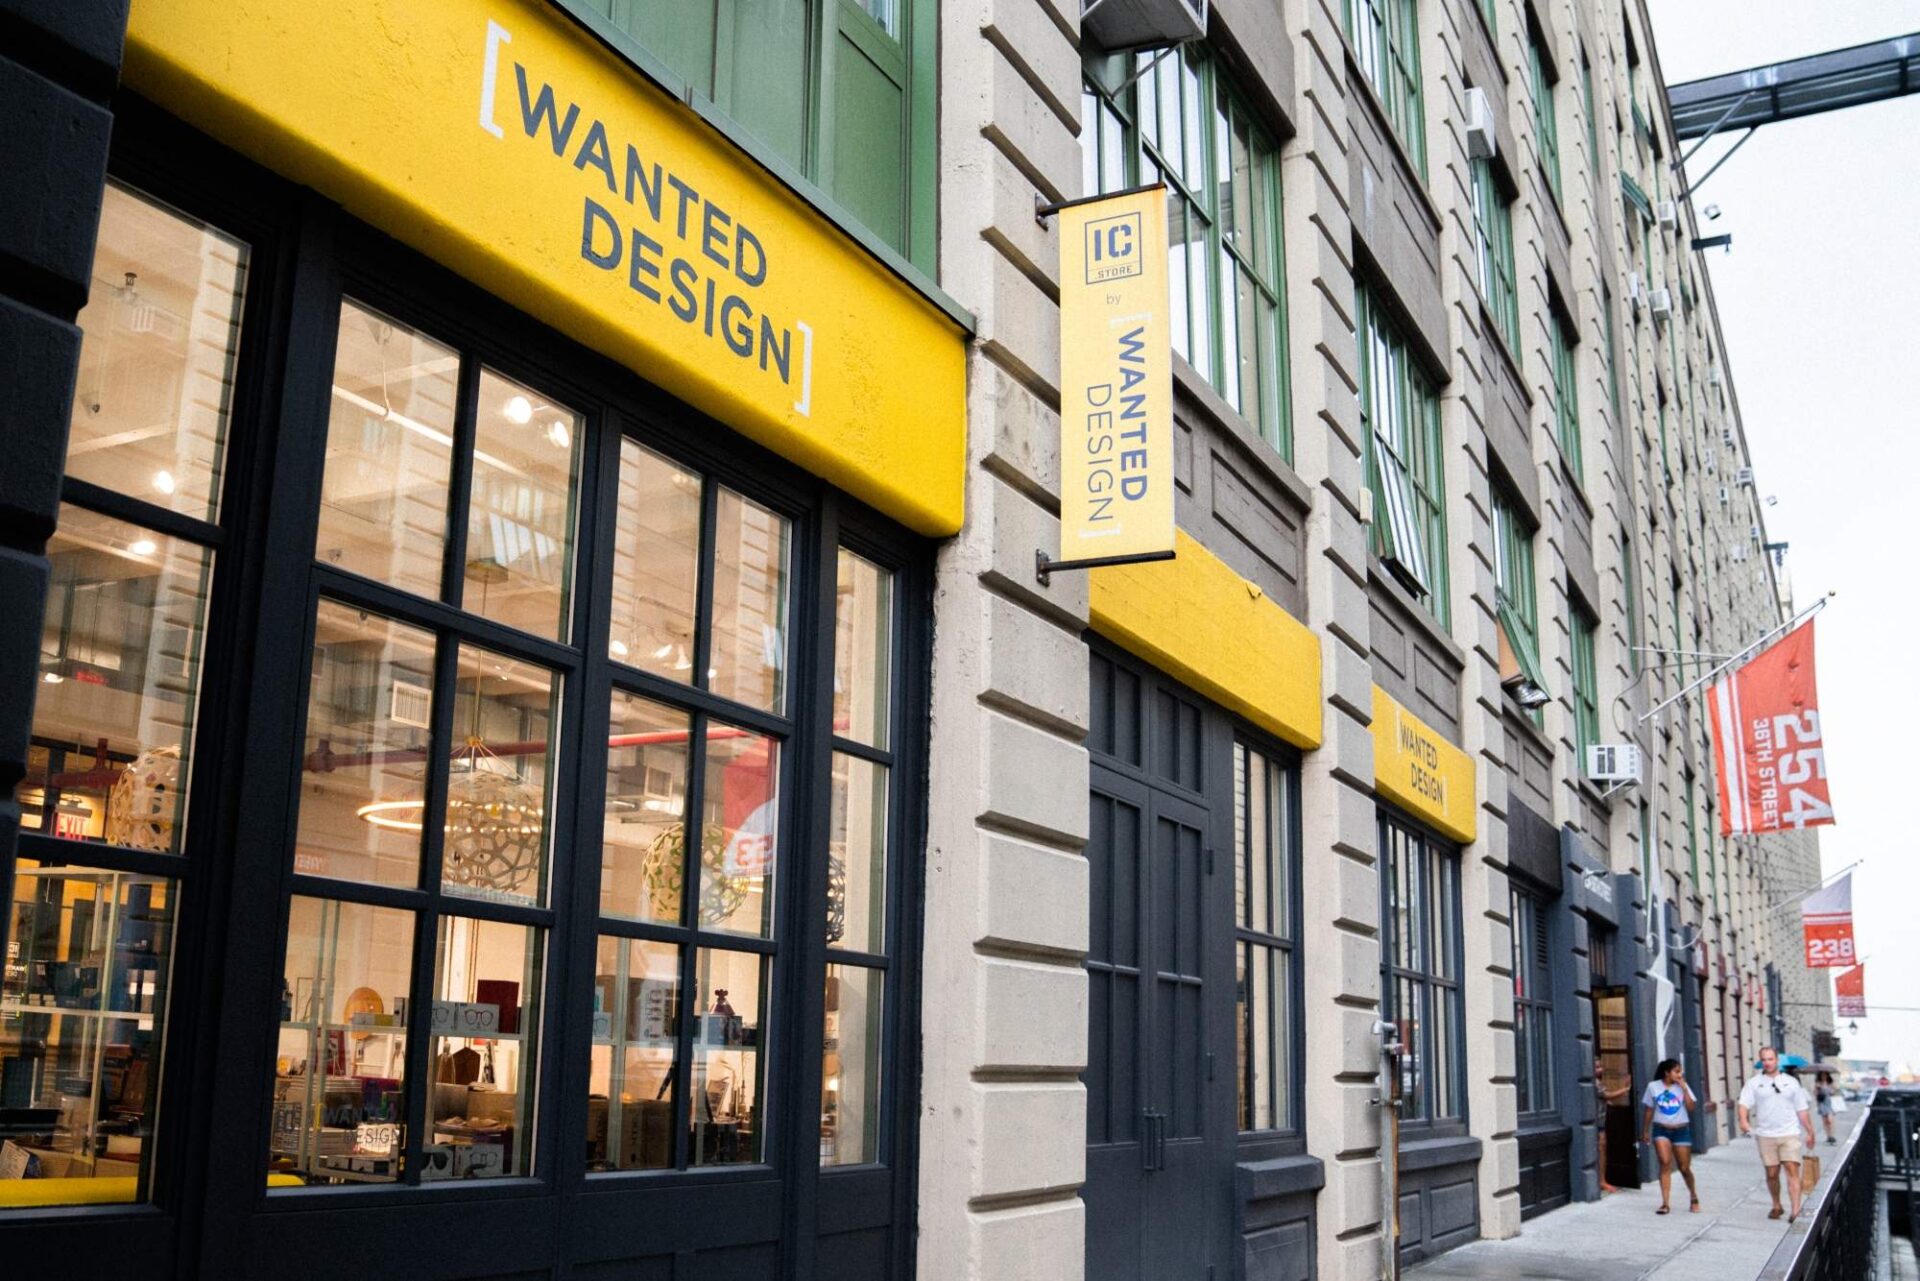 The exterior of a storefront called "Wanted Design."